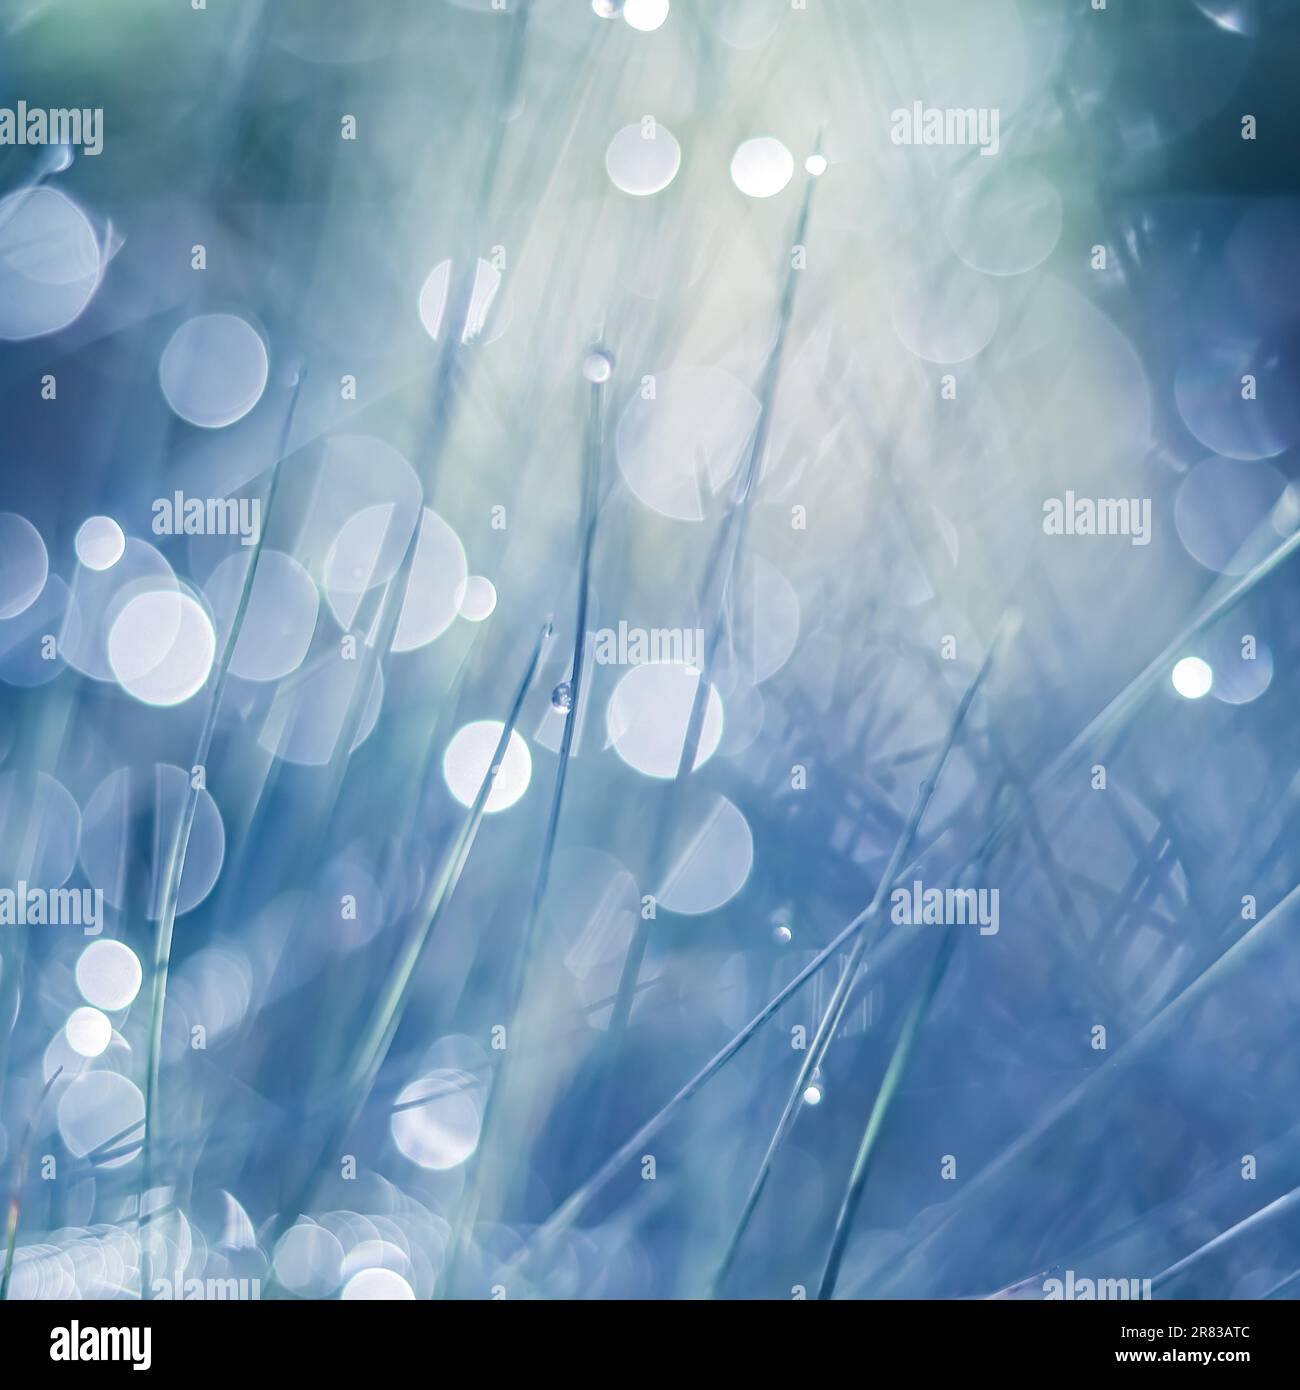 Soft focus ornamental grass with water drop. Blurred blue background Stock Photo